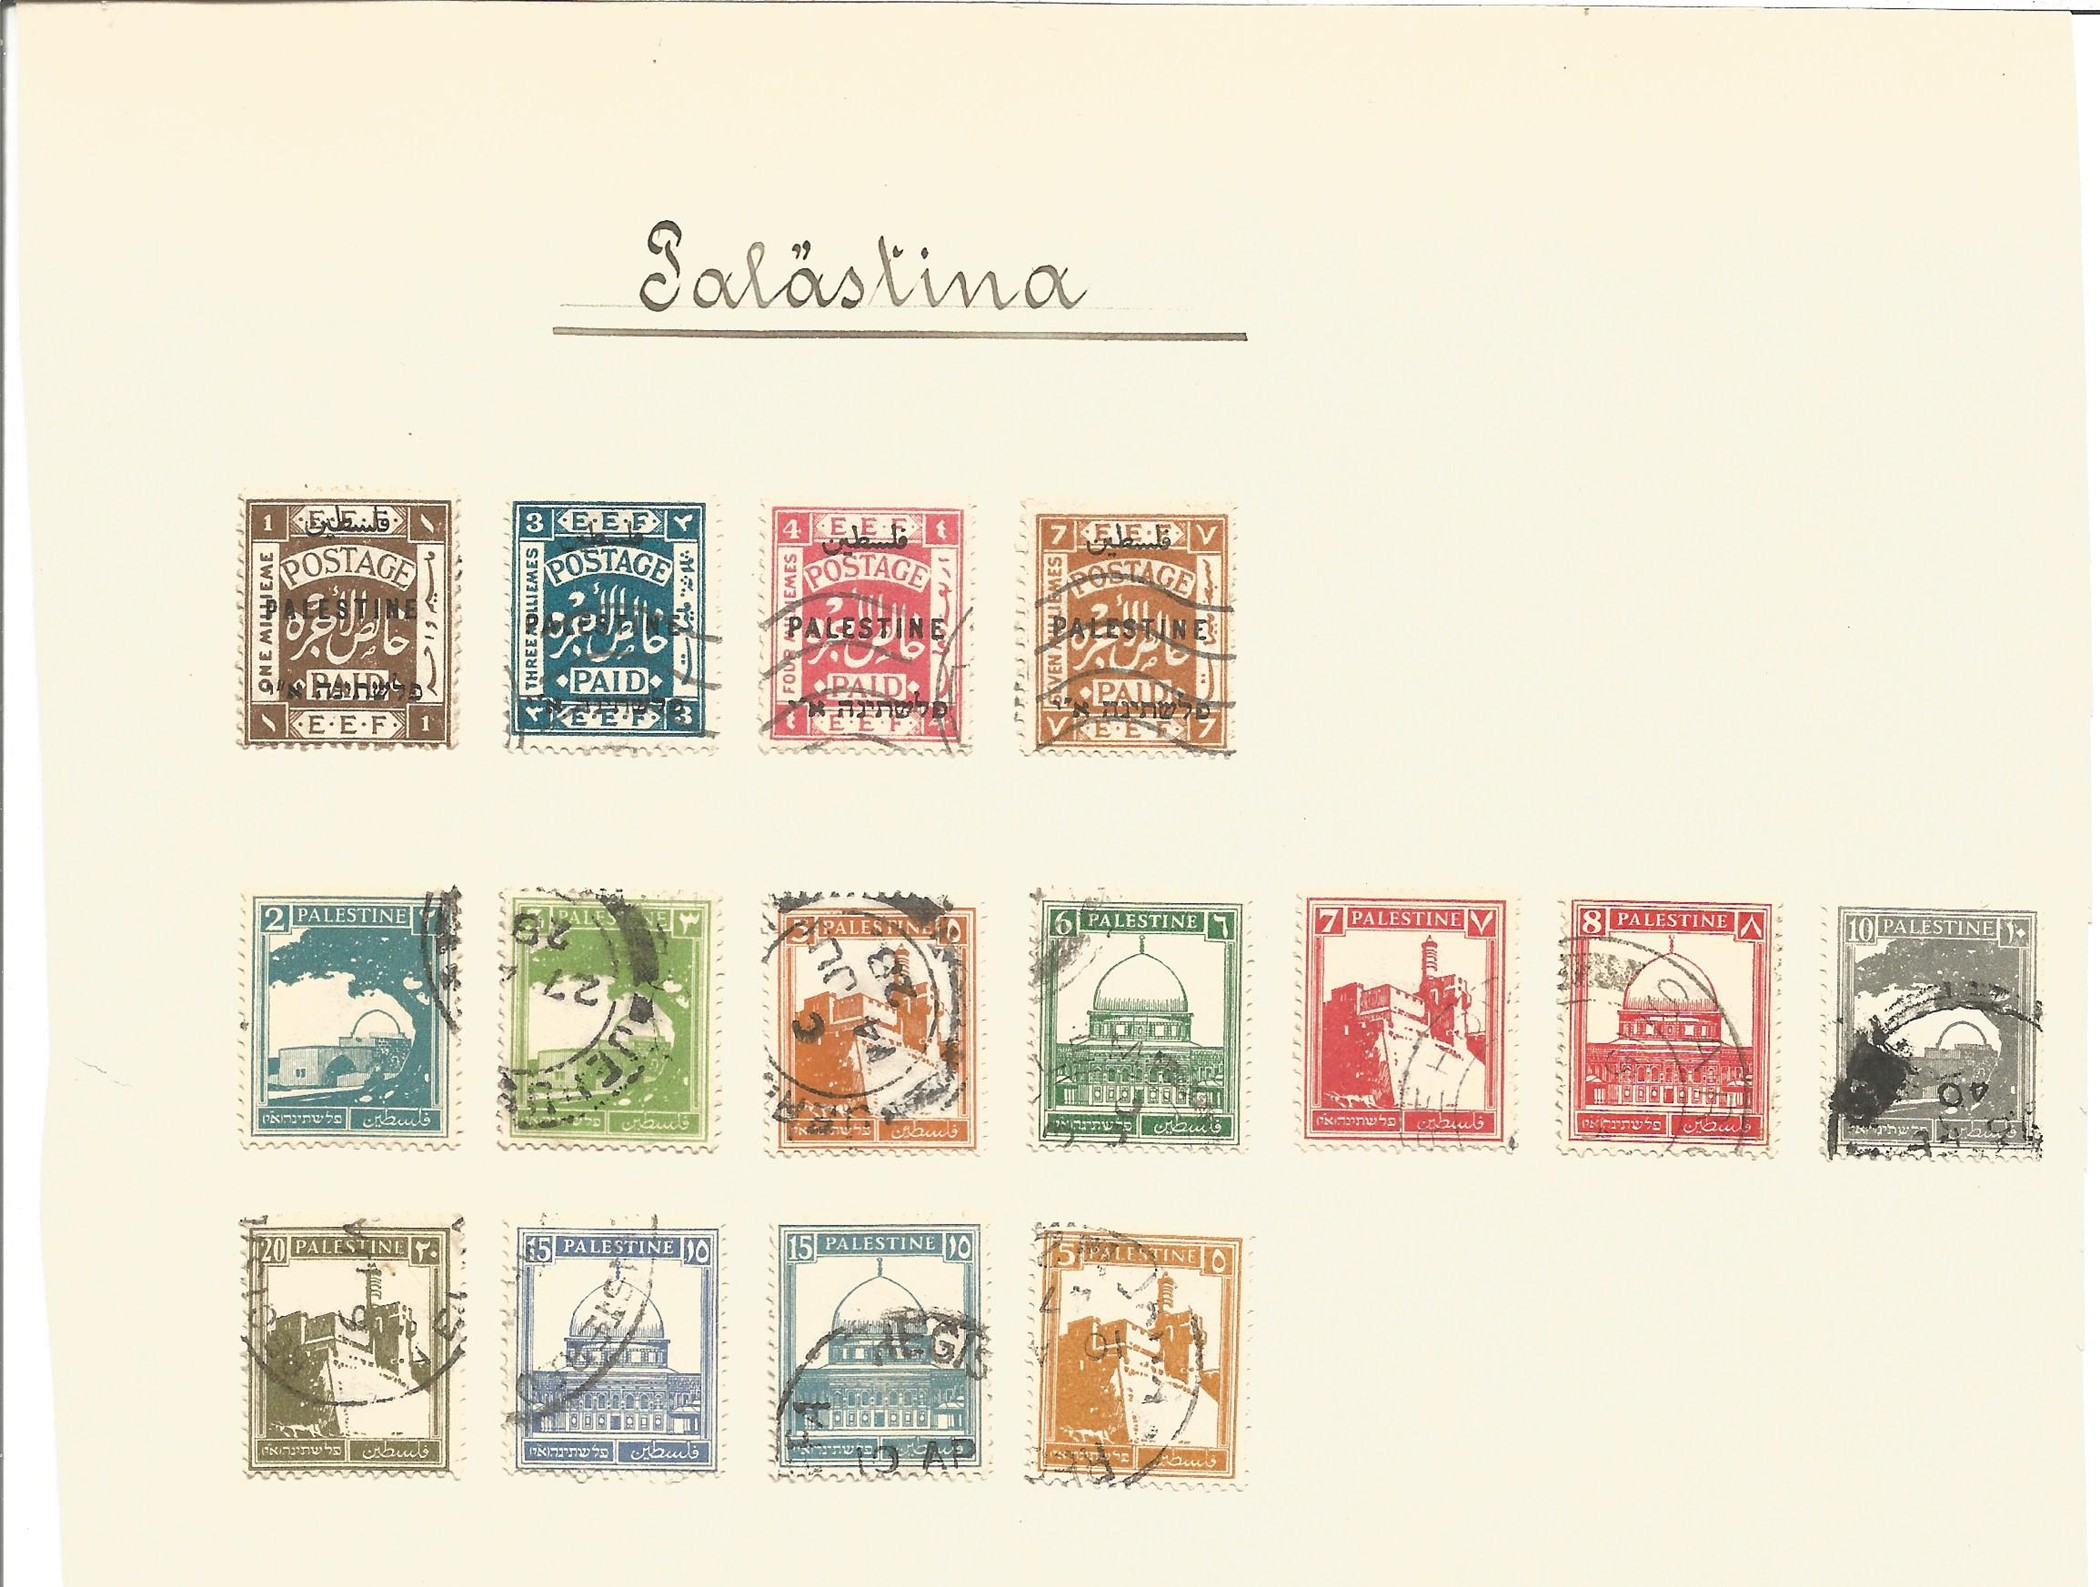 World stamp collection over 10 loose album pages. Includes stamps from Suez canal, Ethiopia, Persia, - Image 2 of 2